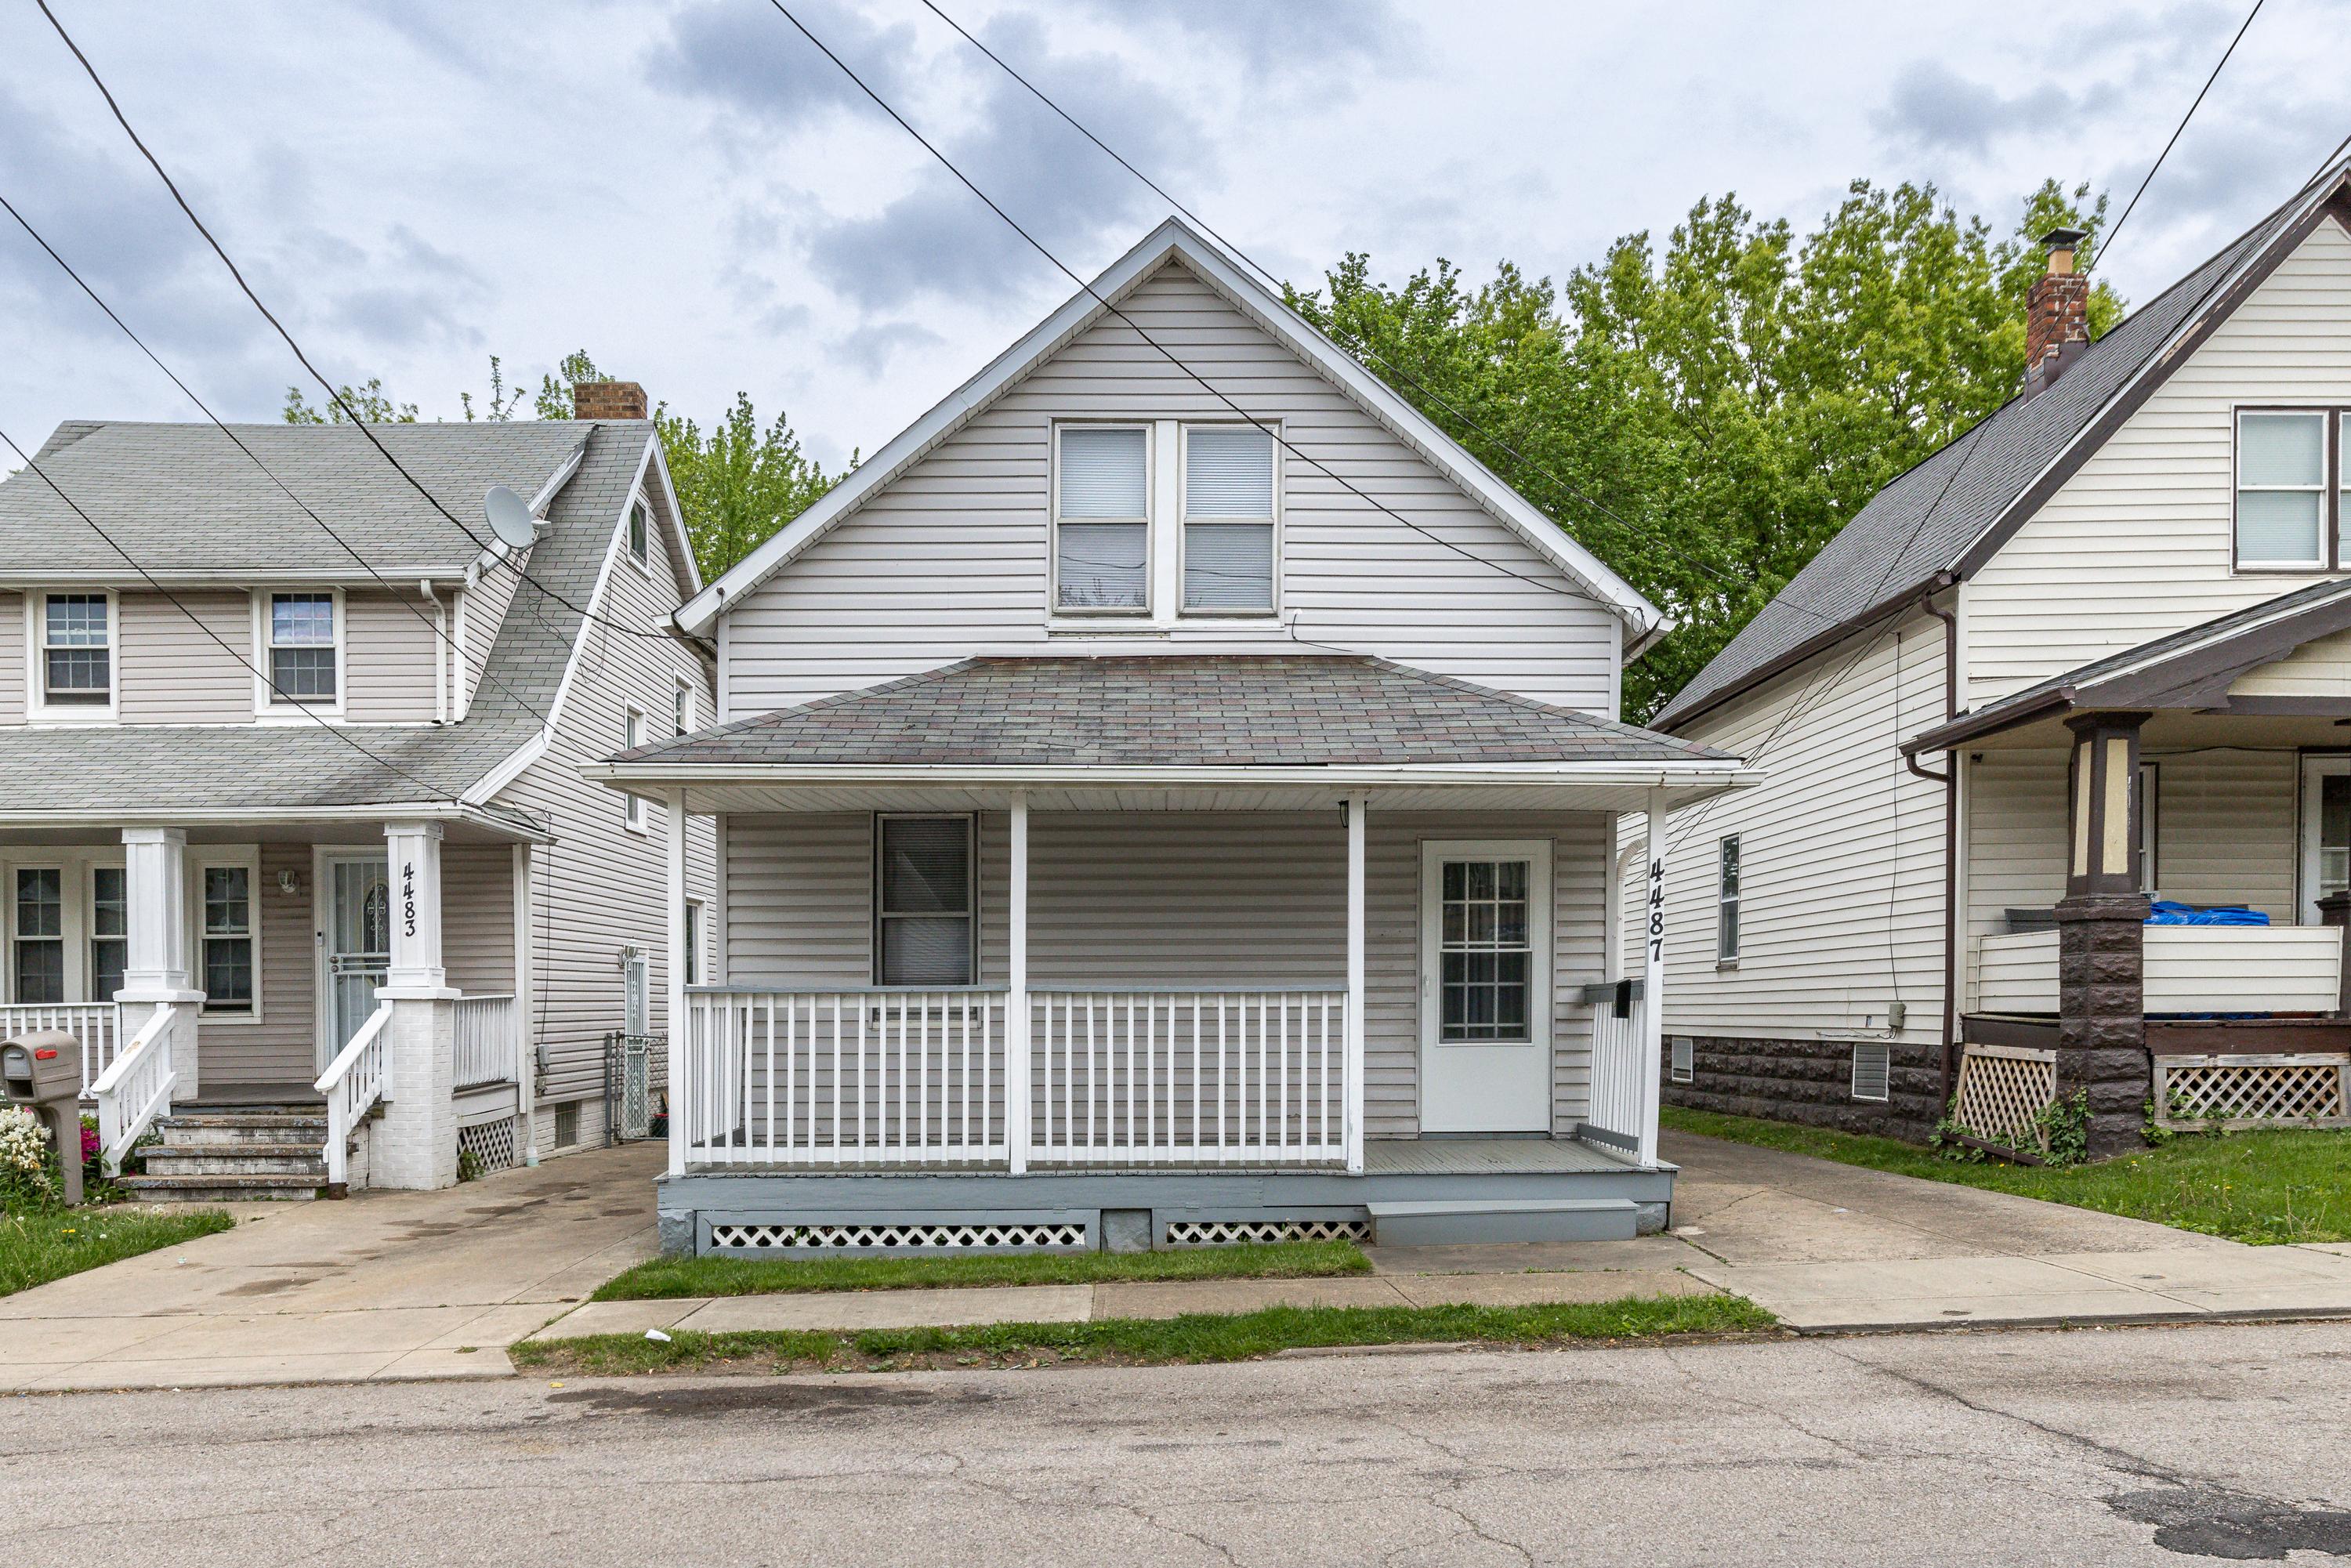 Property Image for 4487 W. 30th St.